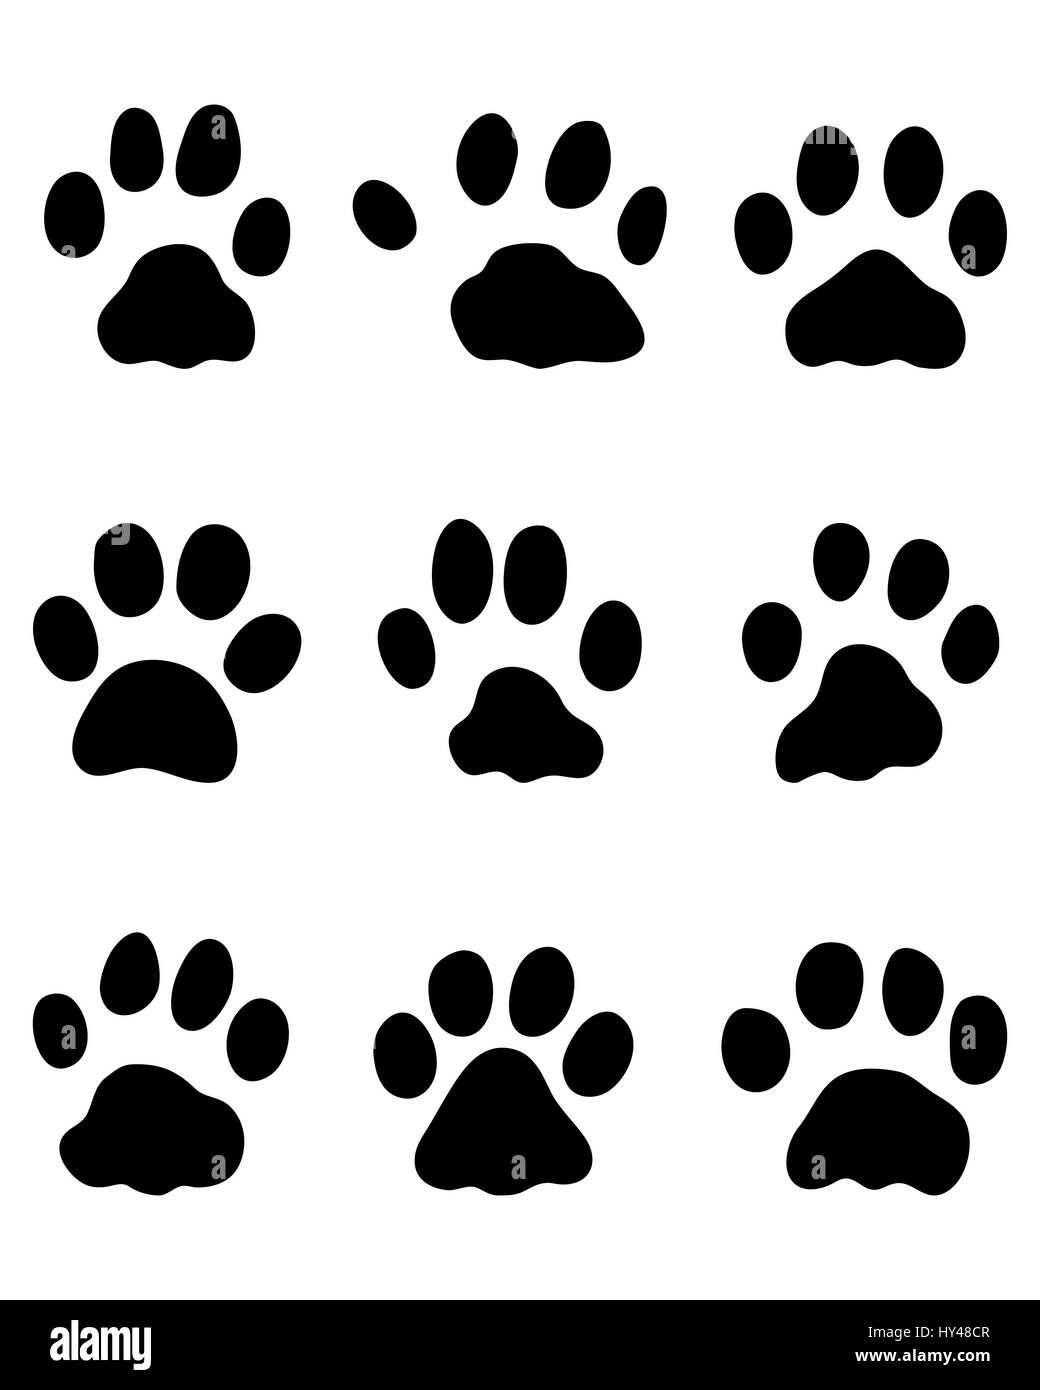 Rabbit Paw Print High Resolution Stock Photography and Images - Alamy